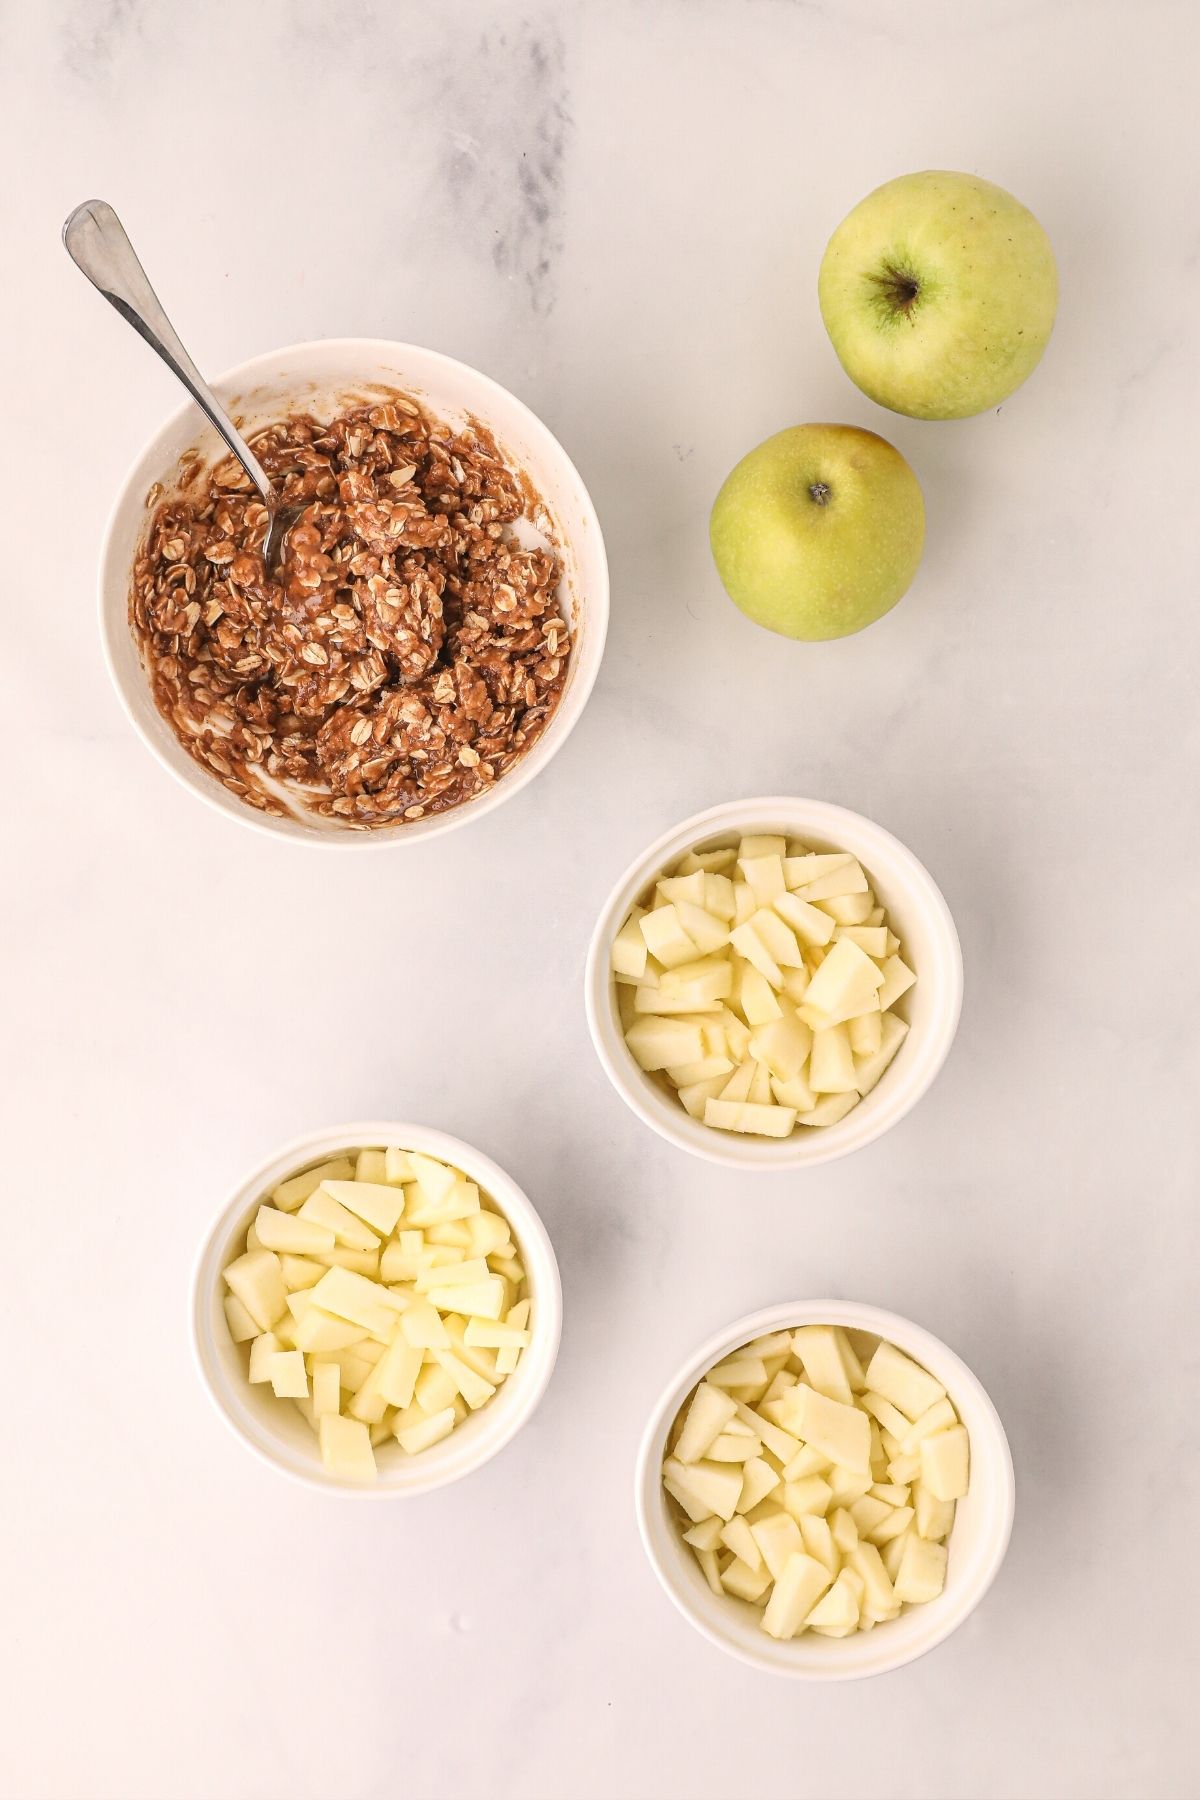 apples divided into ramekins and oats mixed with spices and sugars in a white bowl